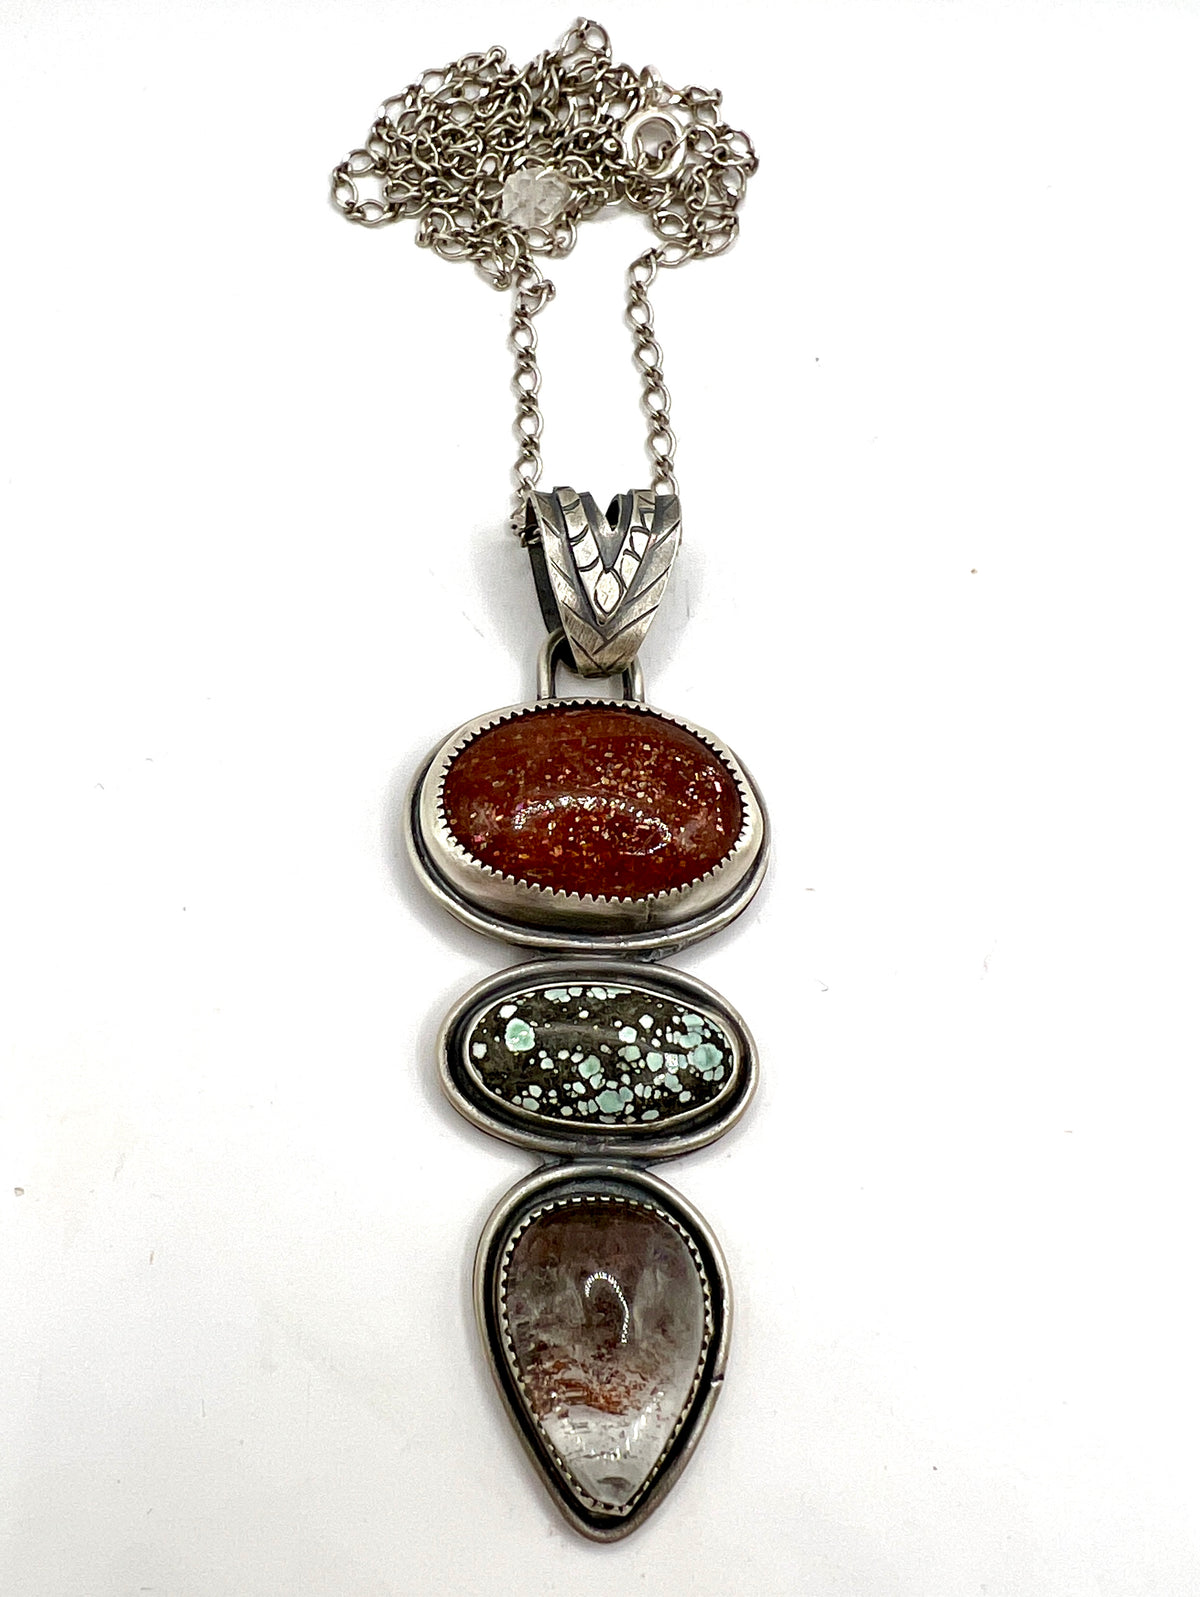 “Let’s Hold Hands” Necklace in Sunstone, Turquoise and Lodolite